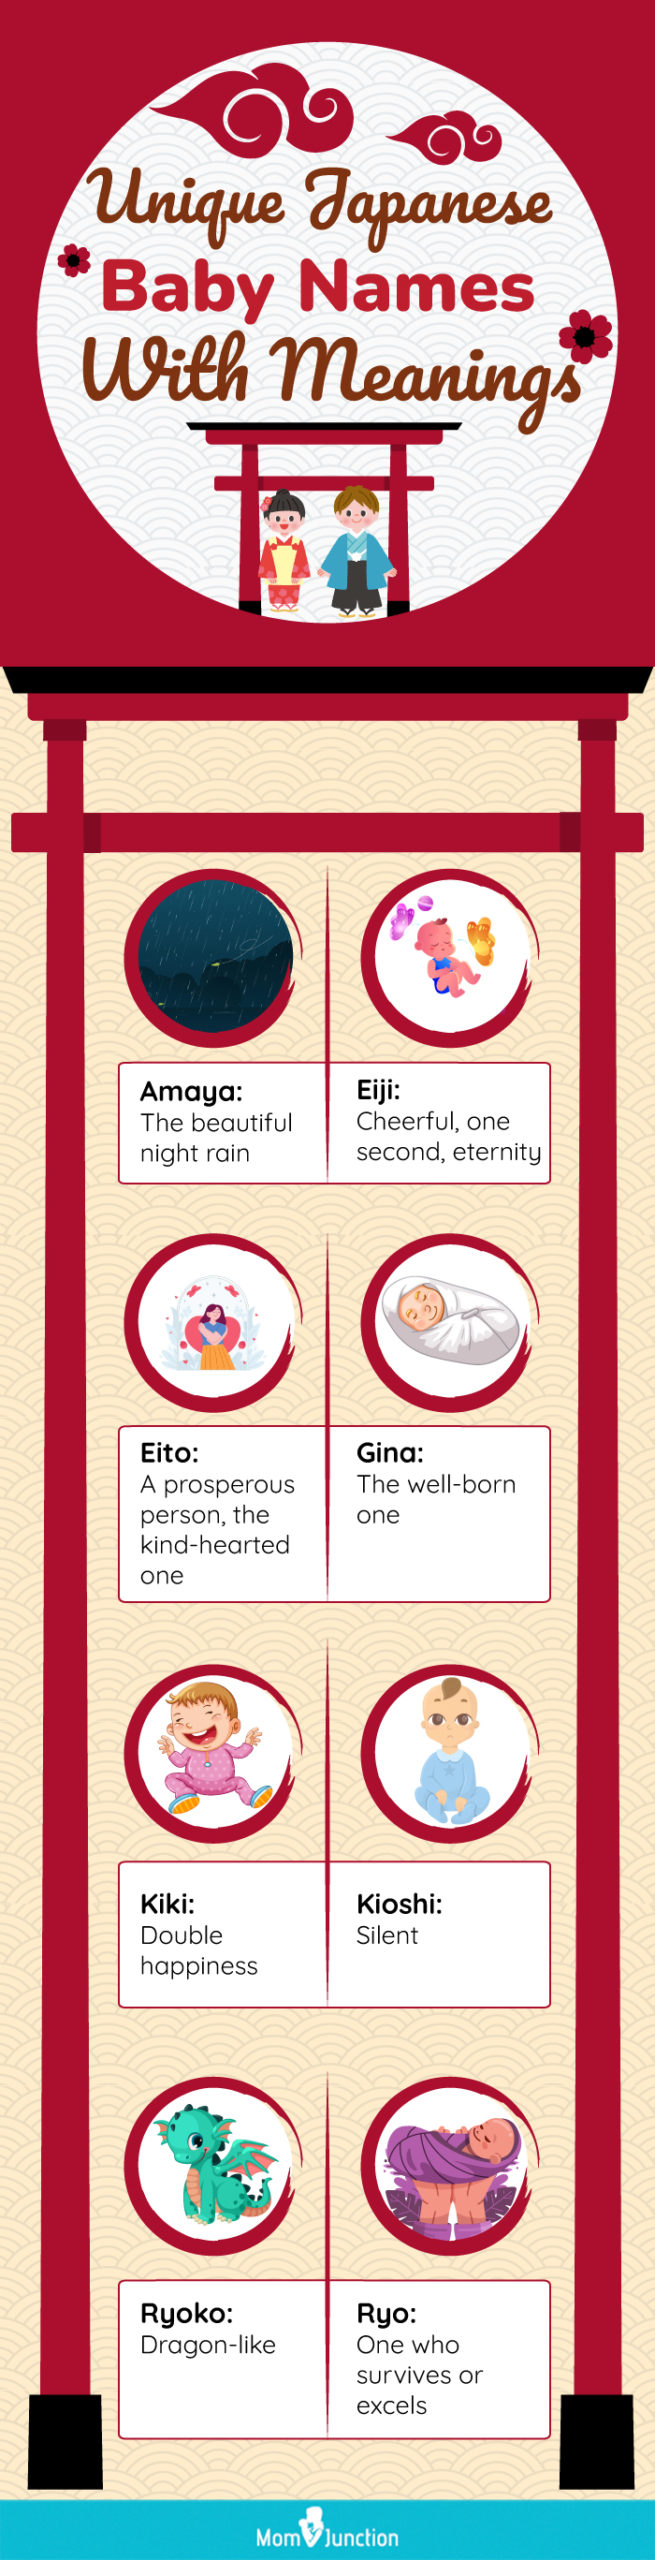 unique japanese baby names with meanings (infographic)